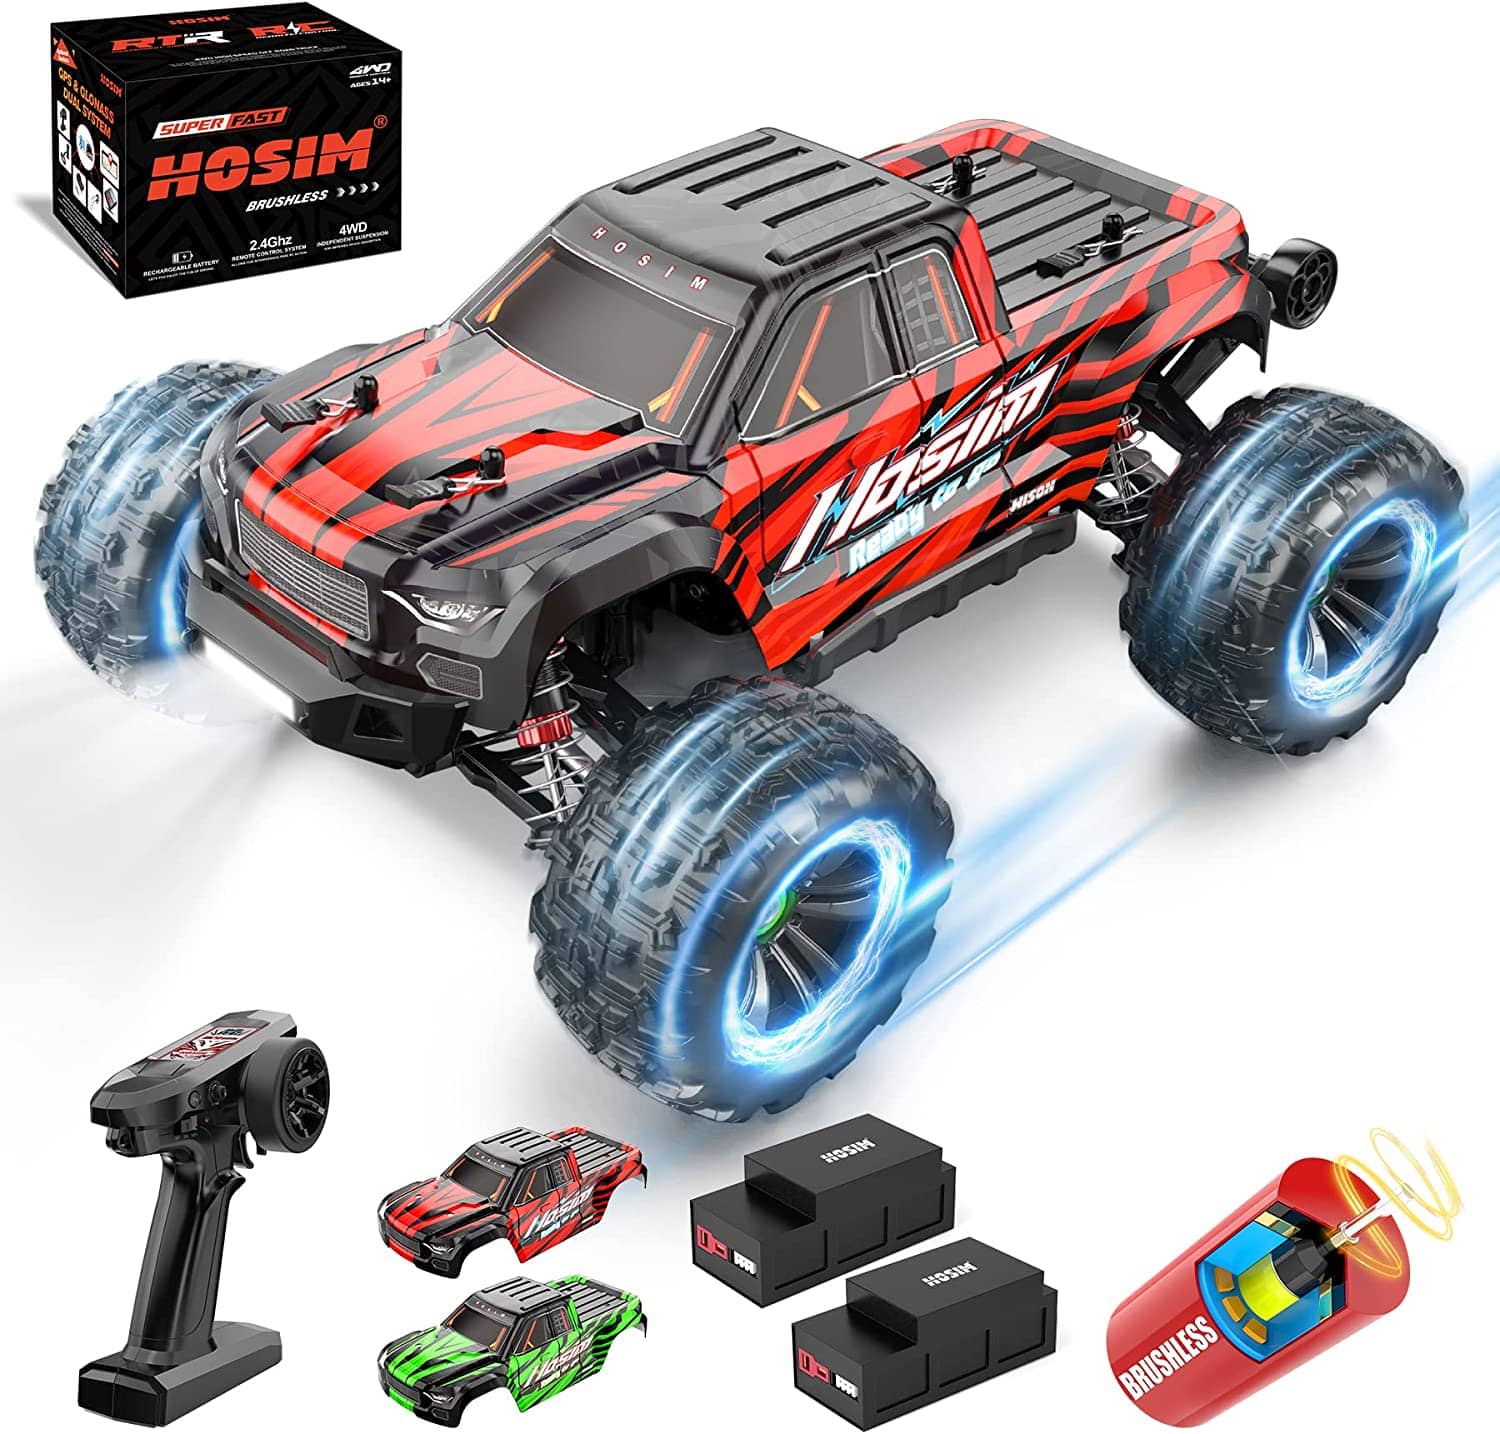 Hosim 1:16 Brushless RC Car 60+KMH 4WD Waterproof Fast Remote Control Truck Radio Cars Off-Road Hobby Grade Toy Crawler Electric Vehicle Gift for Boys Adult Children